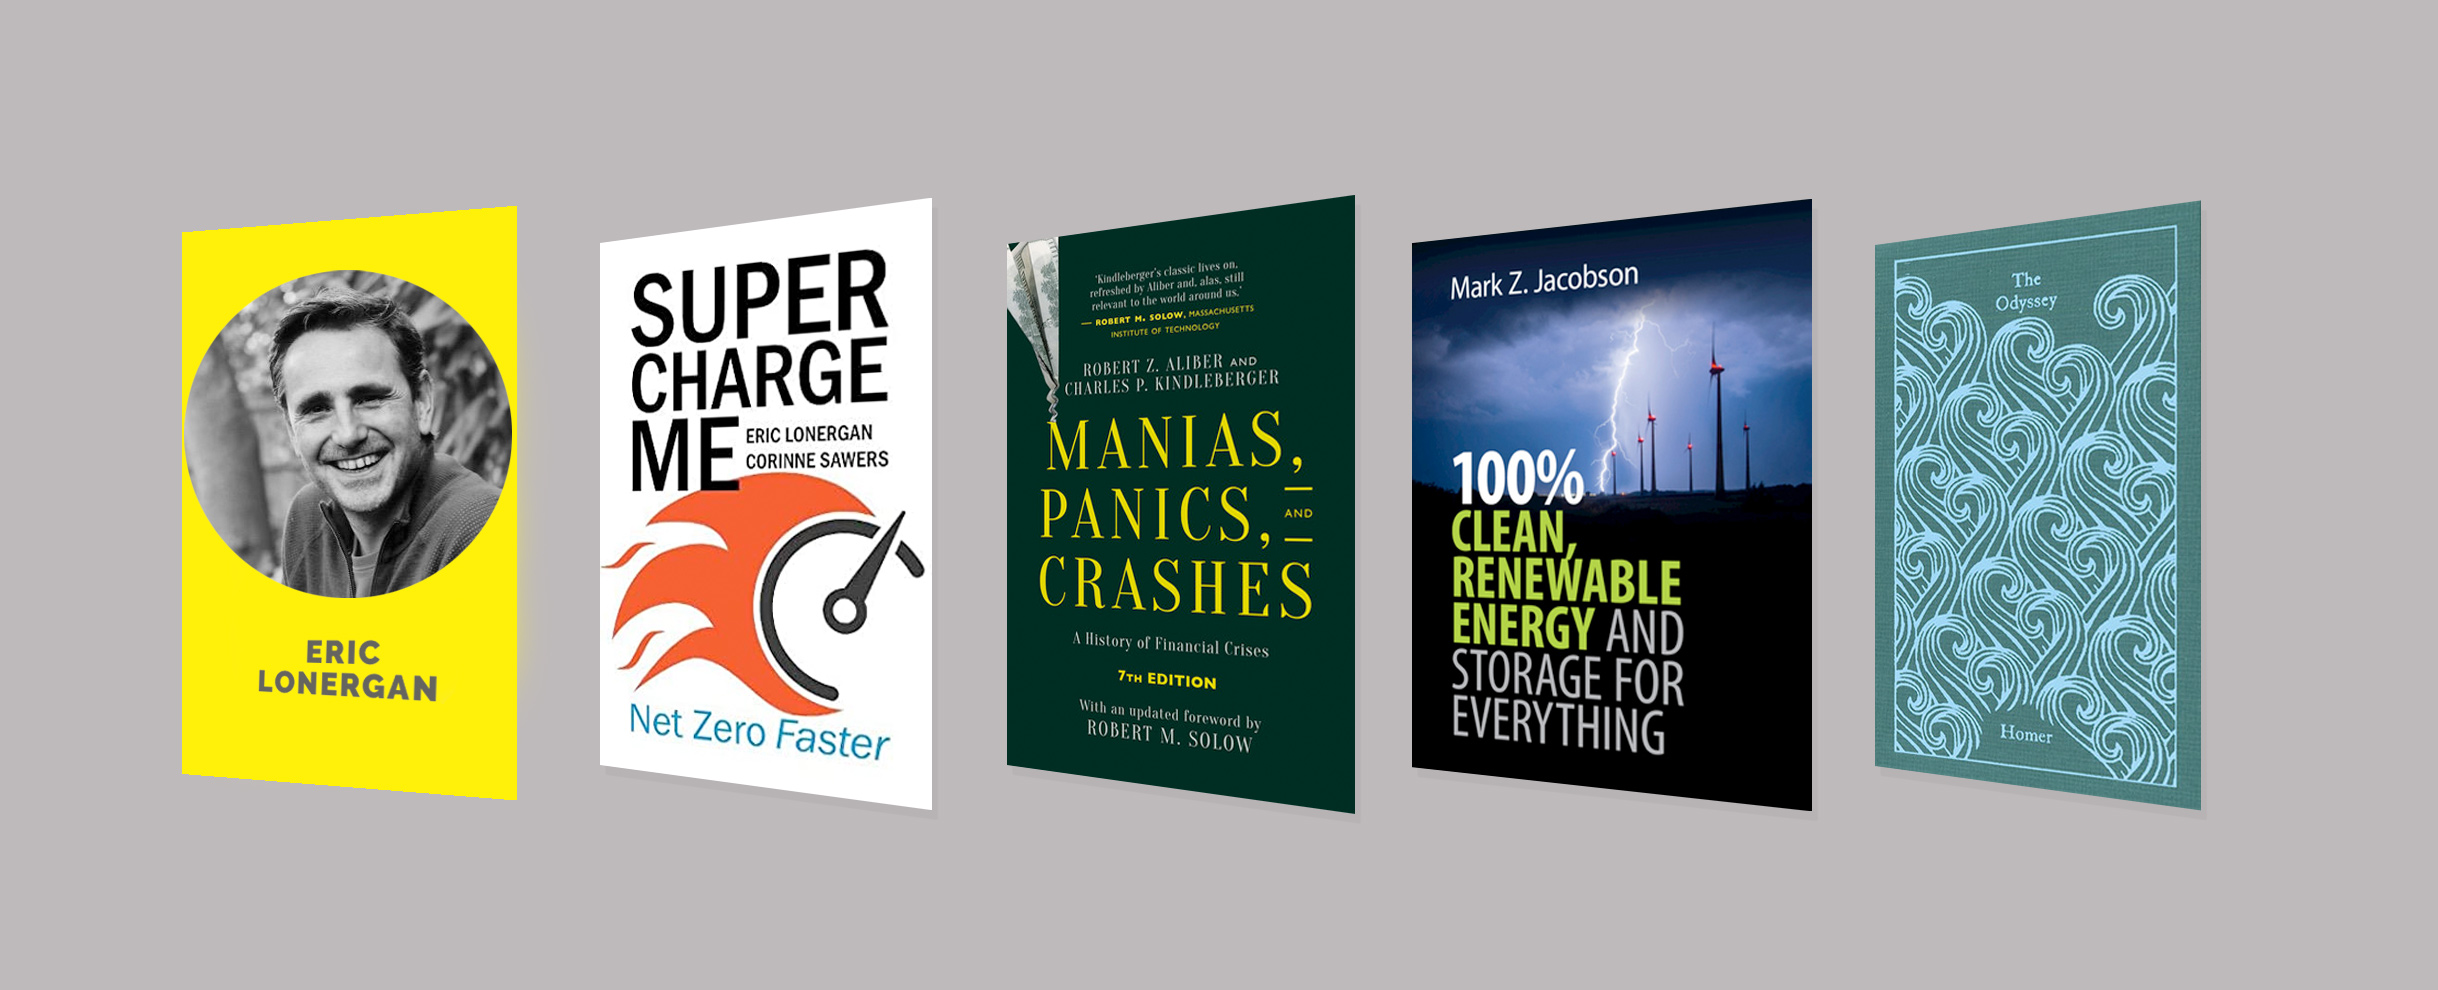 Interview with Eric Lonergan, author of Supercharge Me: Net Zero Faster